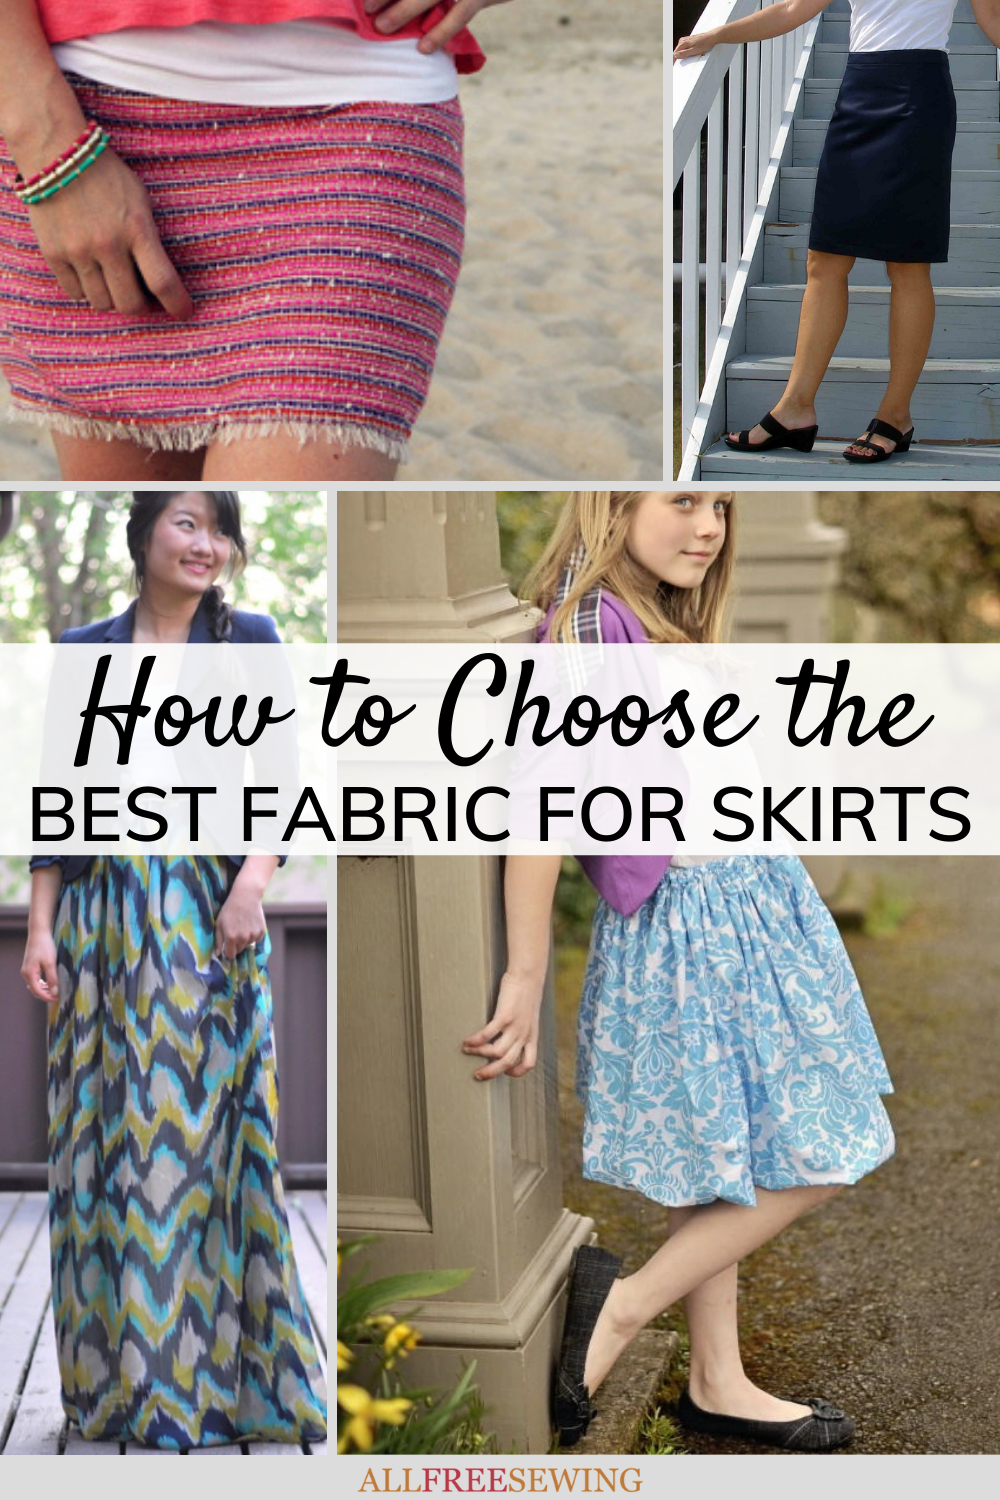 Tips for Choosing the Best Fabric for a Skirt